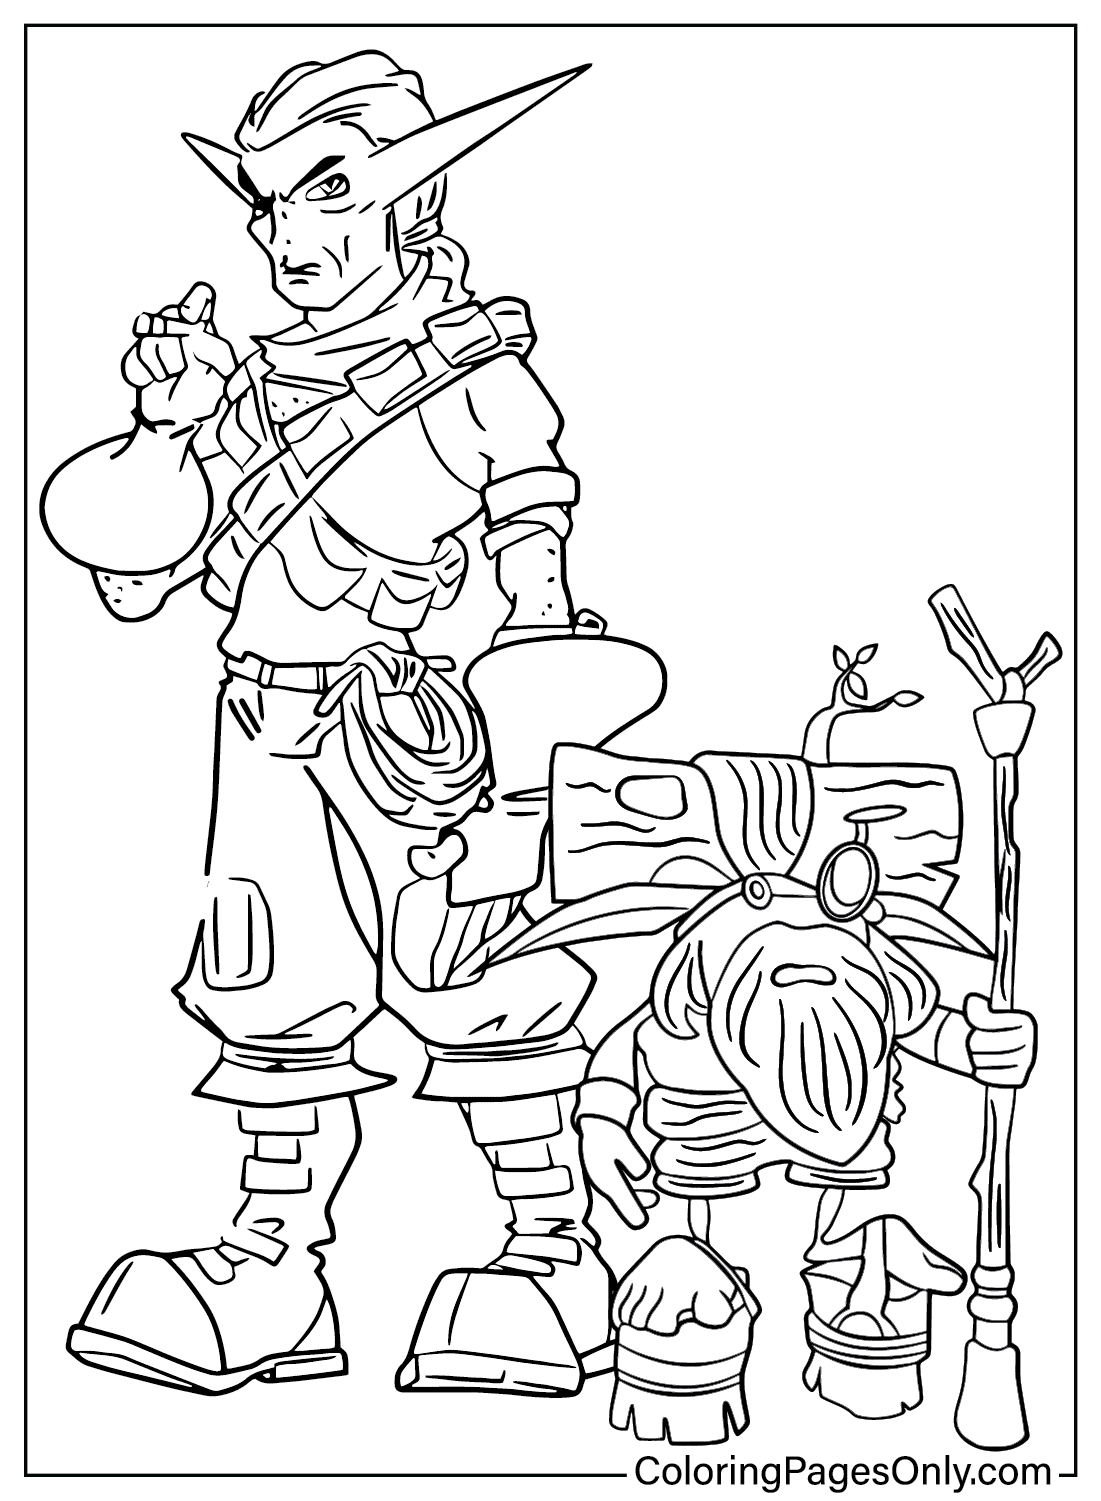 Samos and Jinx Printable Coloring Page from Jak and Daxter